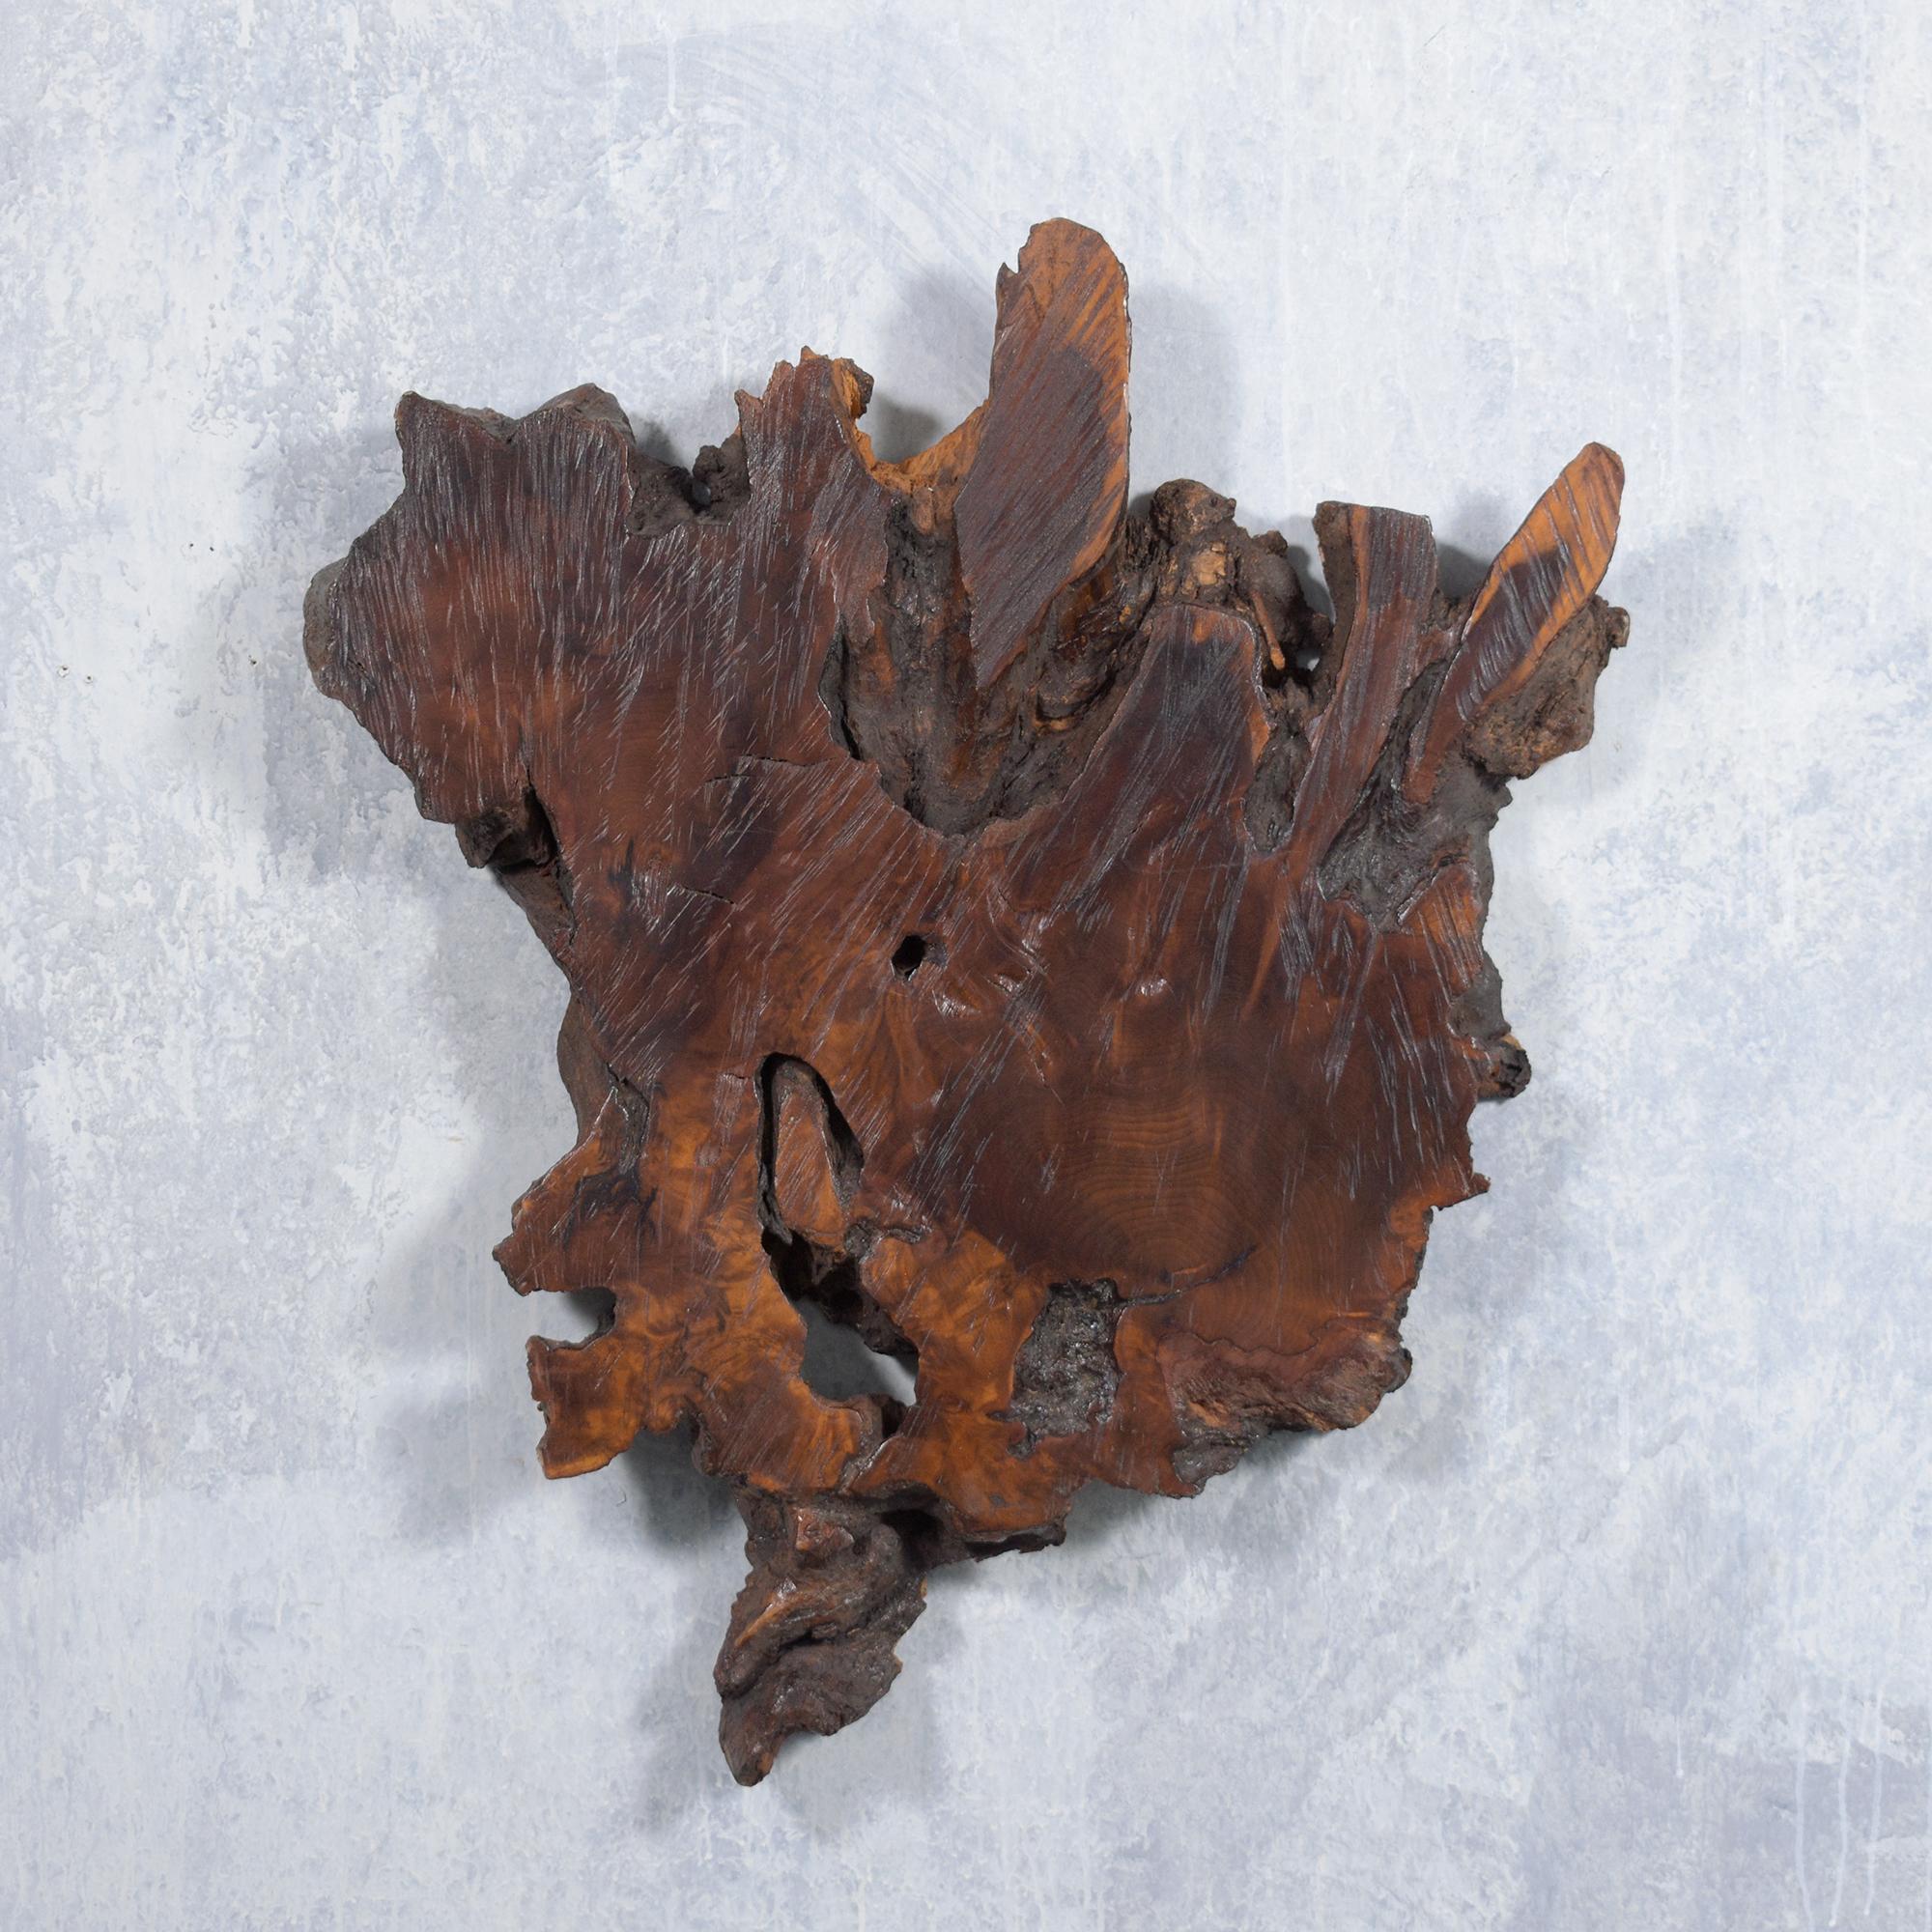 Add a touch of organic elegance to your space with our vintage wall sculpture, masterfully crafted from a solid wood slab. This piece is in great condition, showcasing the timeless beauty and warmth of natural wood.

The sculpture features a natural